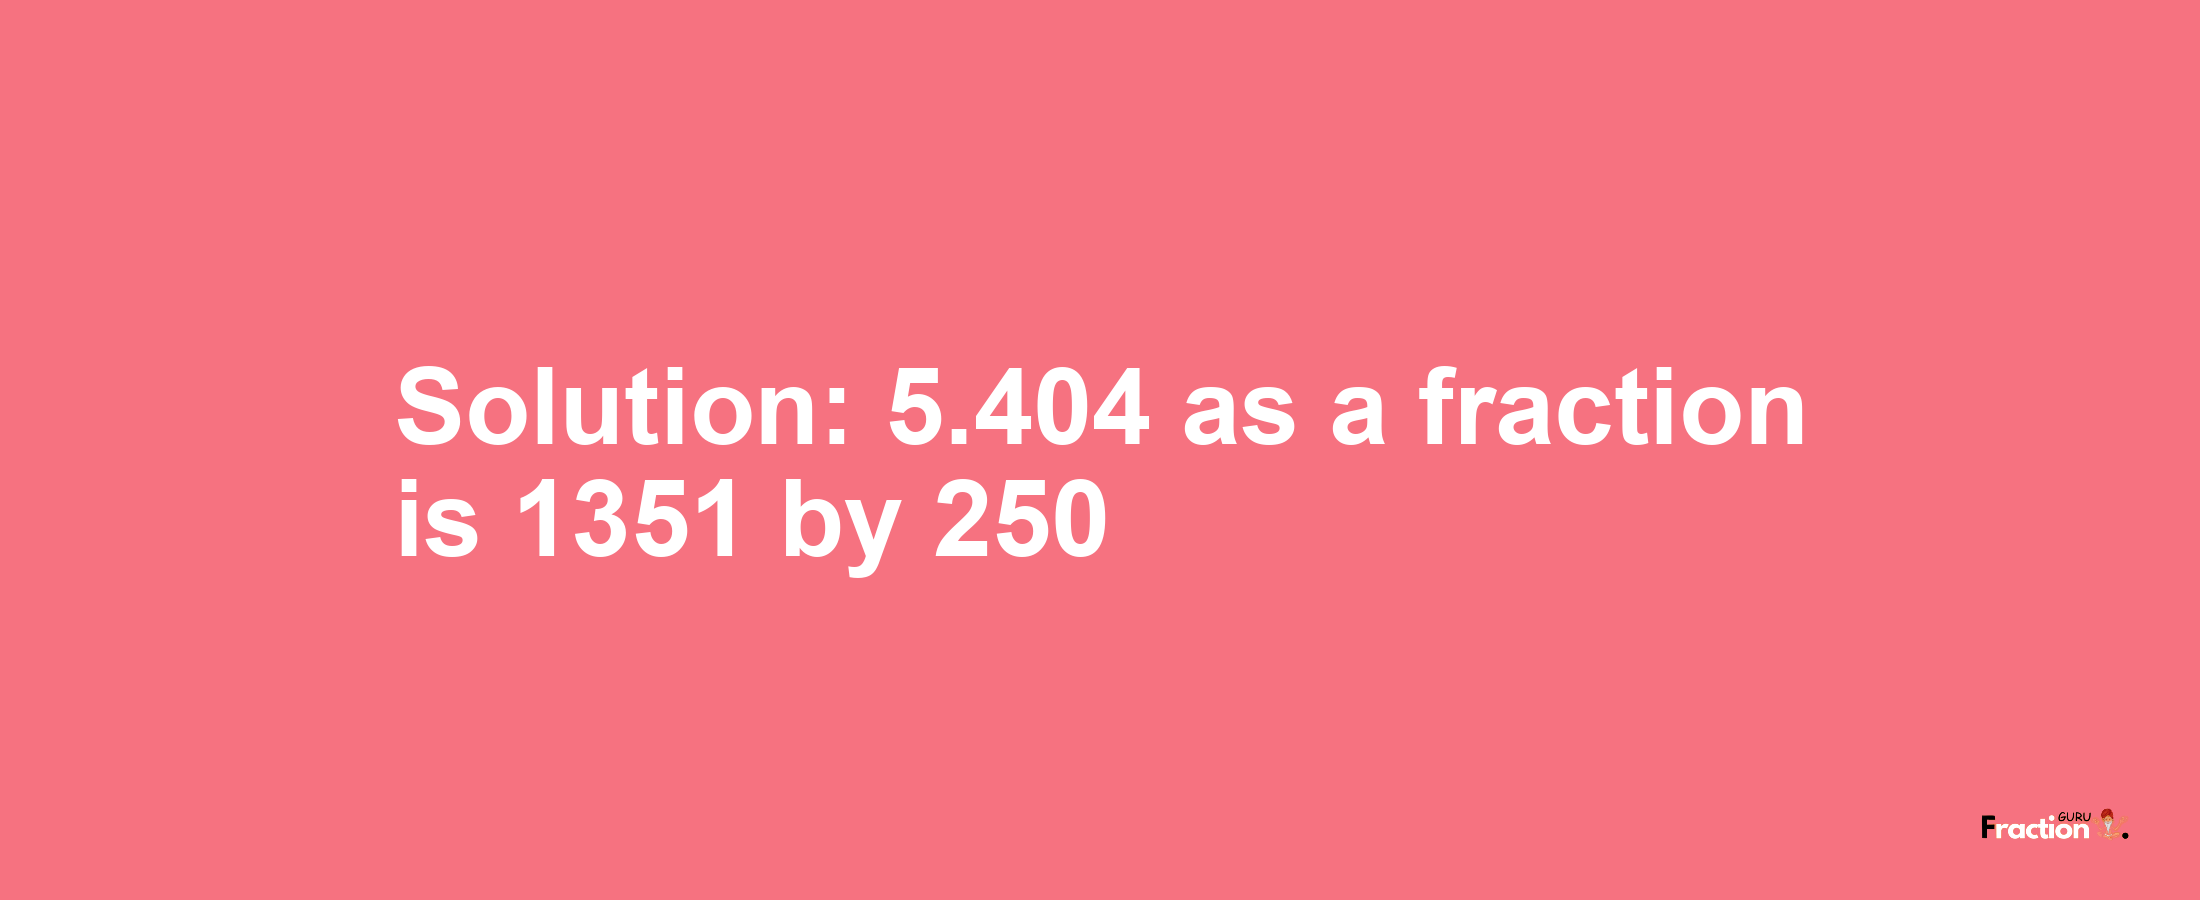 Solution:5.404 as a fraction is 1351/250